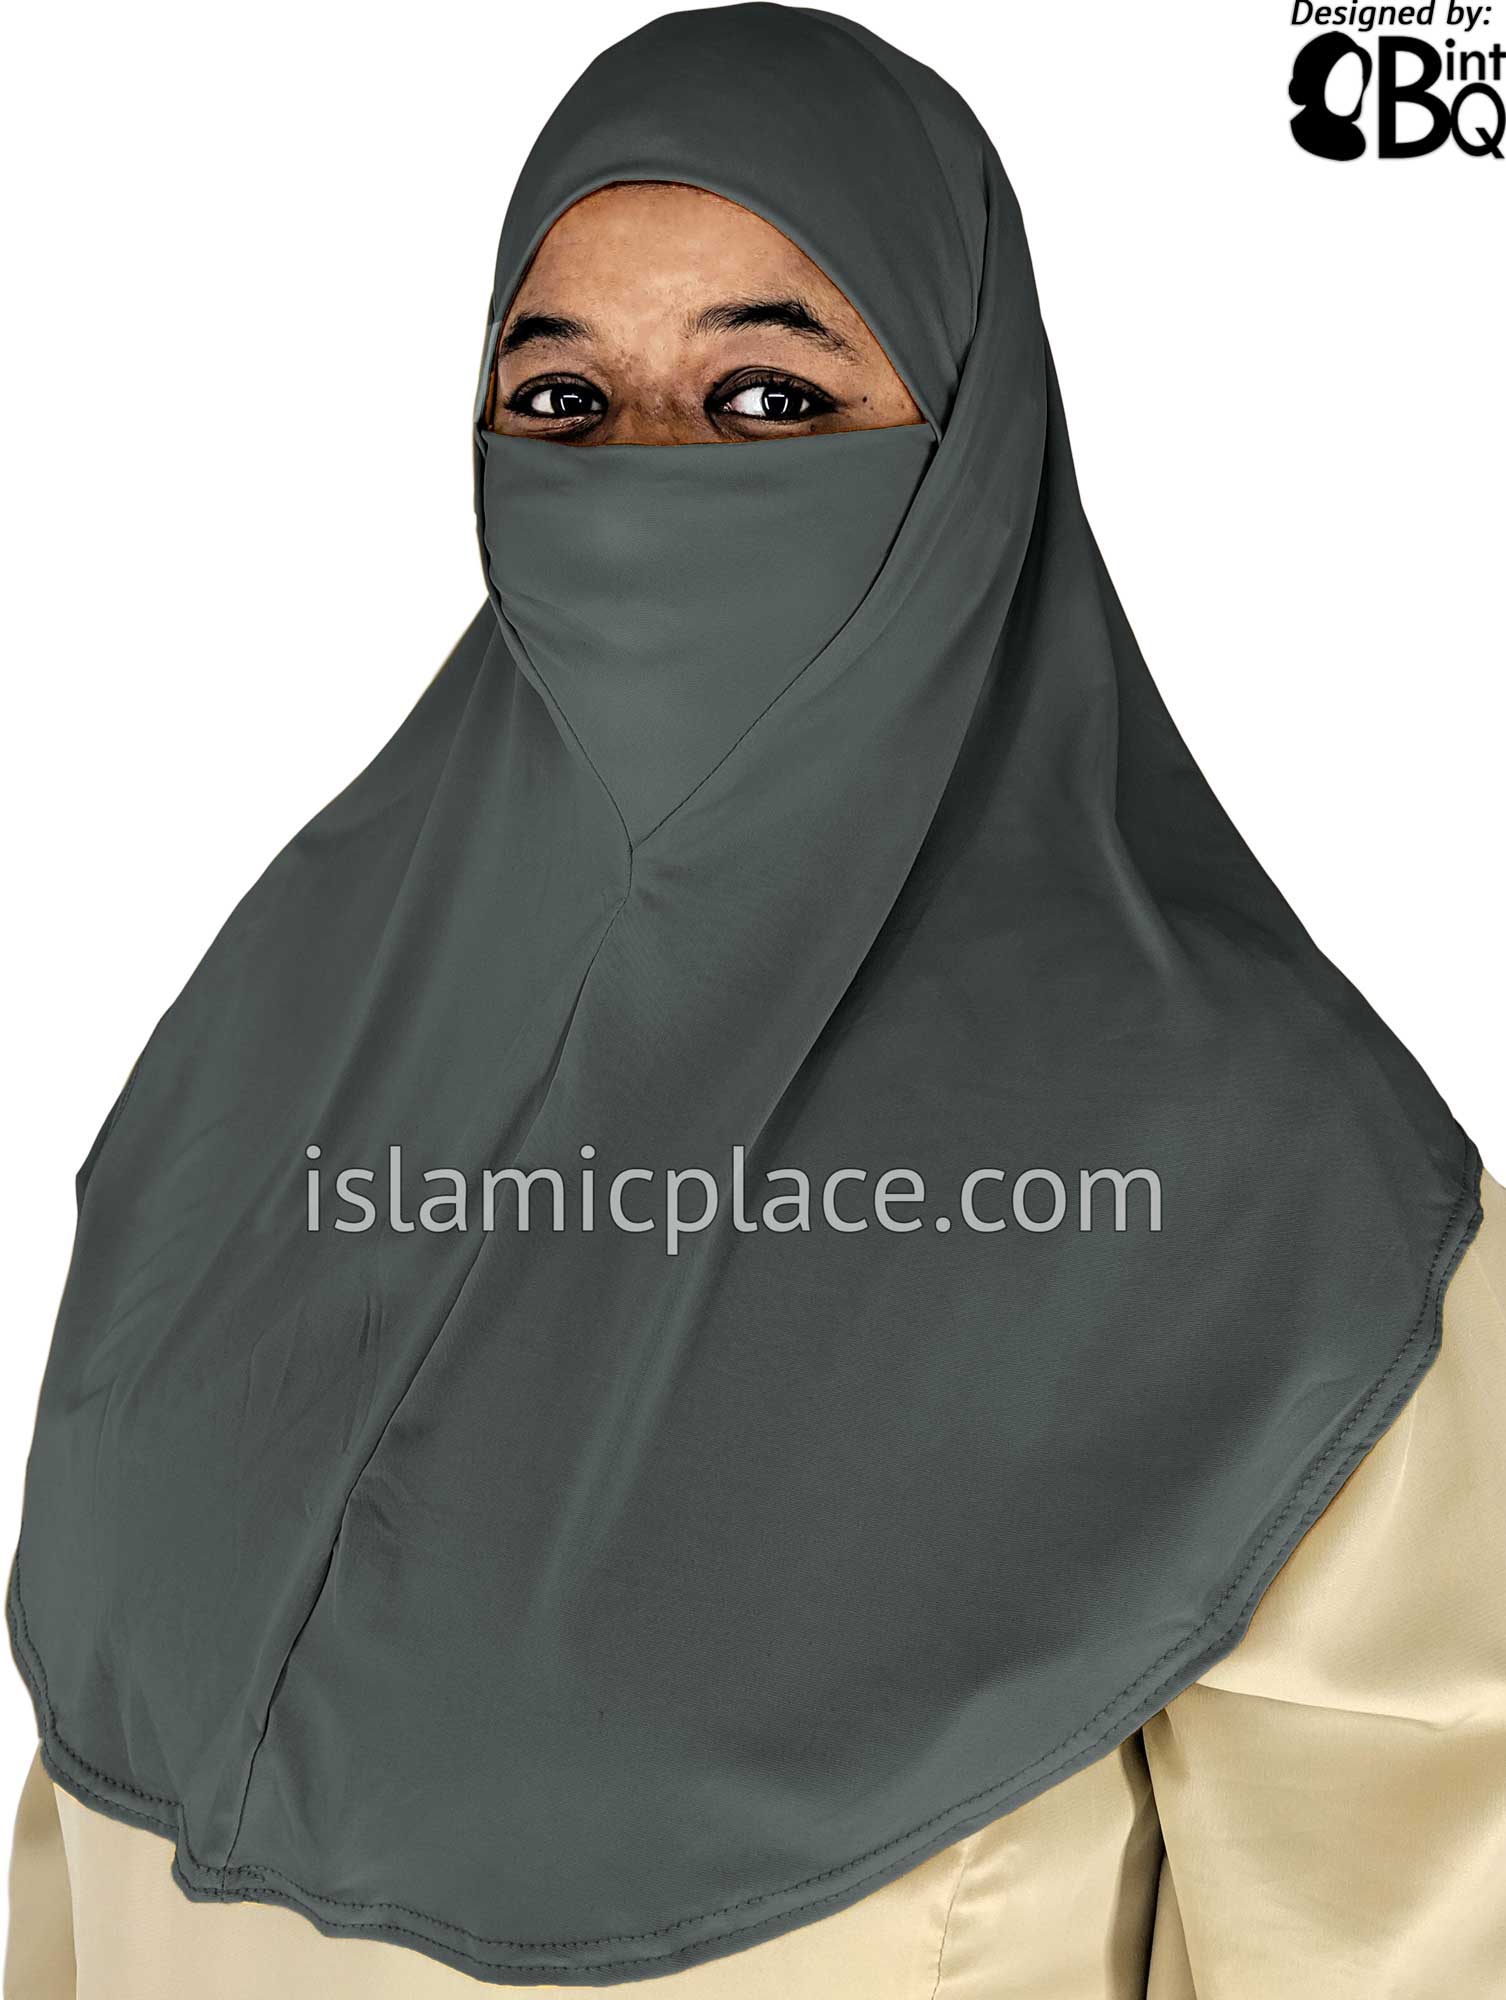 Charcoal Gray - Plain Teen to Adult (Large) Hijab Al-Amira with Built-in Niqab